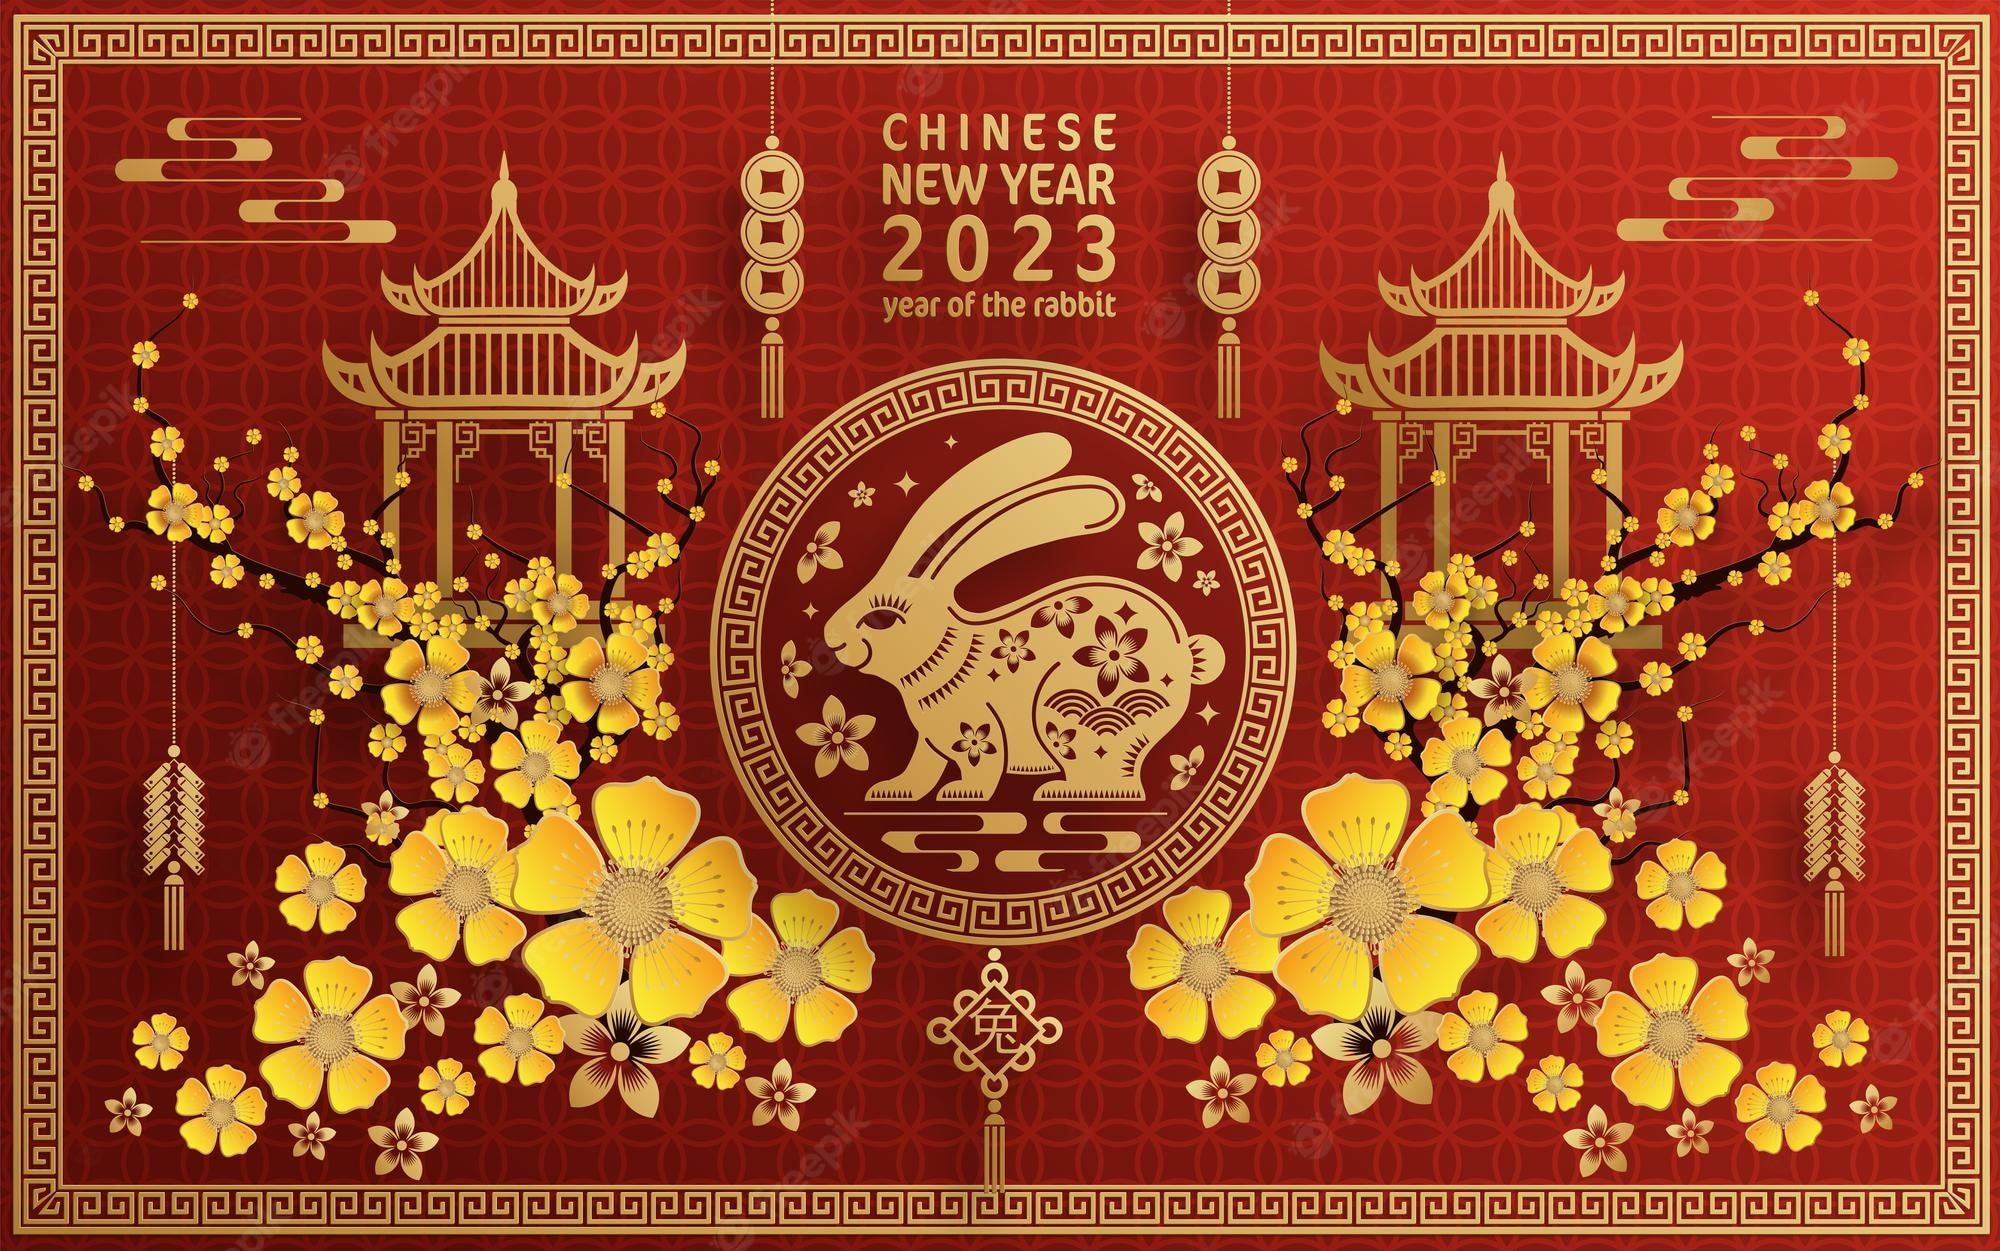 Chinese New Year 2023 Watch Faces  Phone Wallpaper  Vanco Design Co   Online Shop